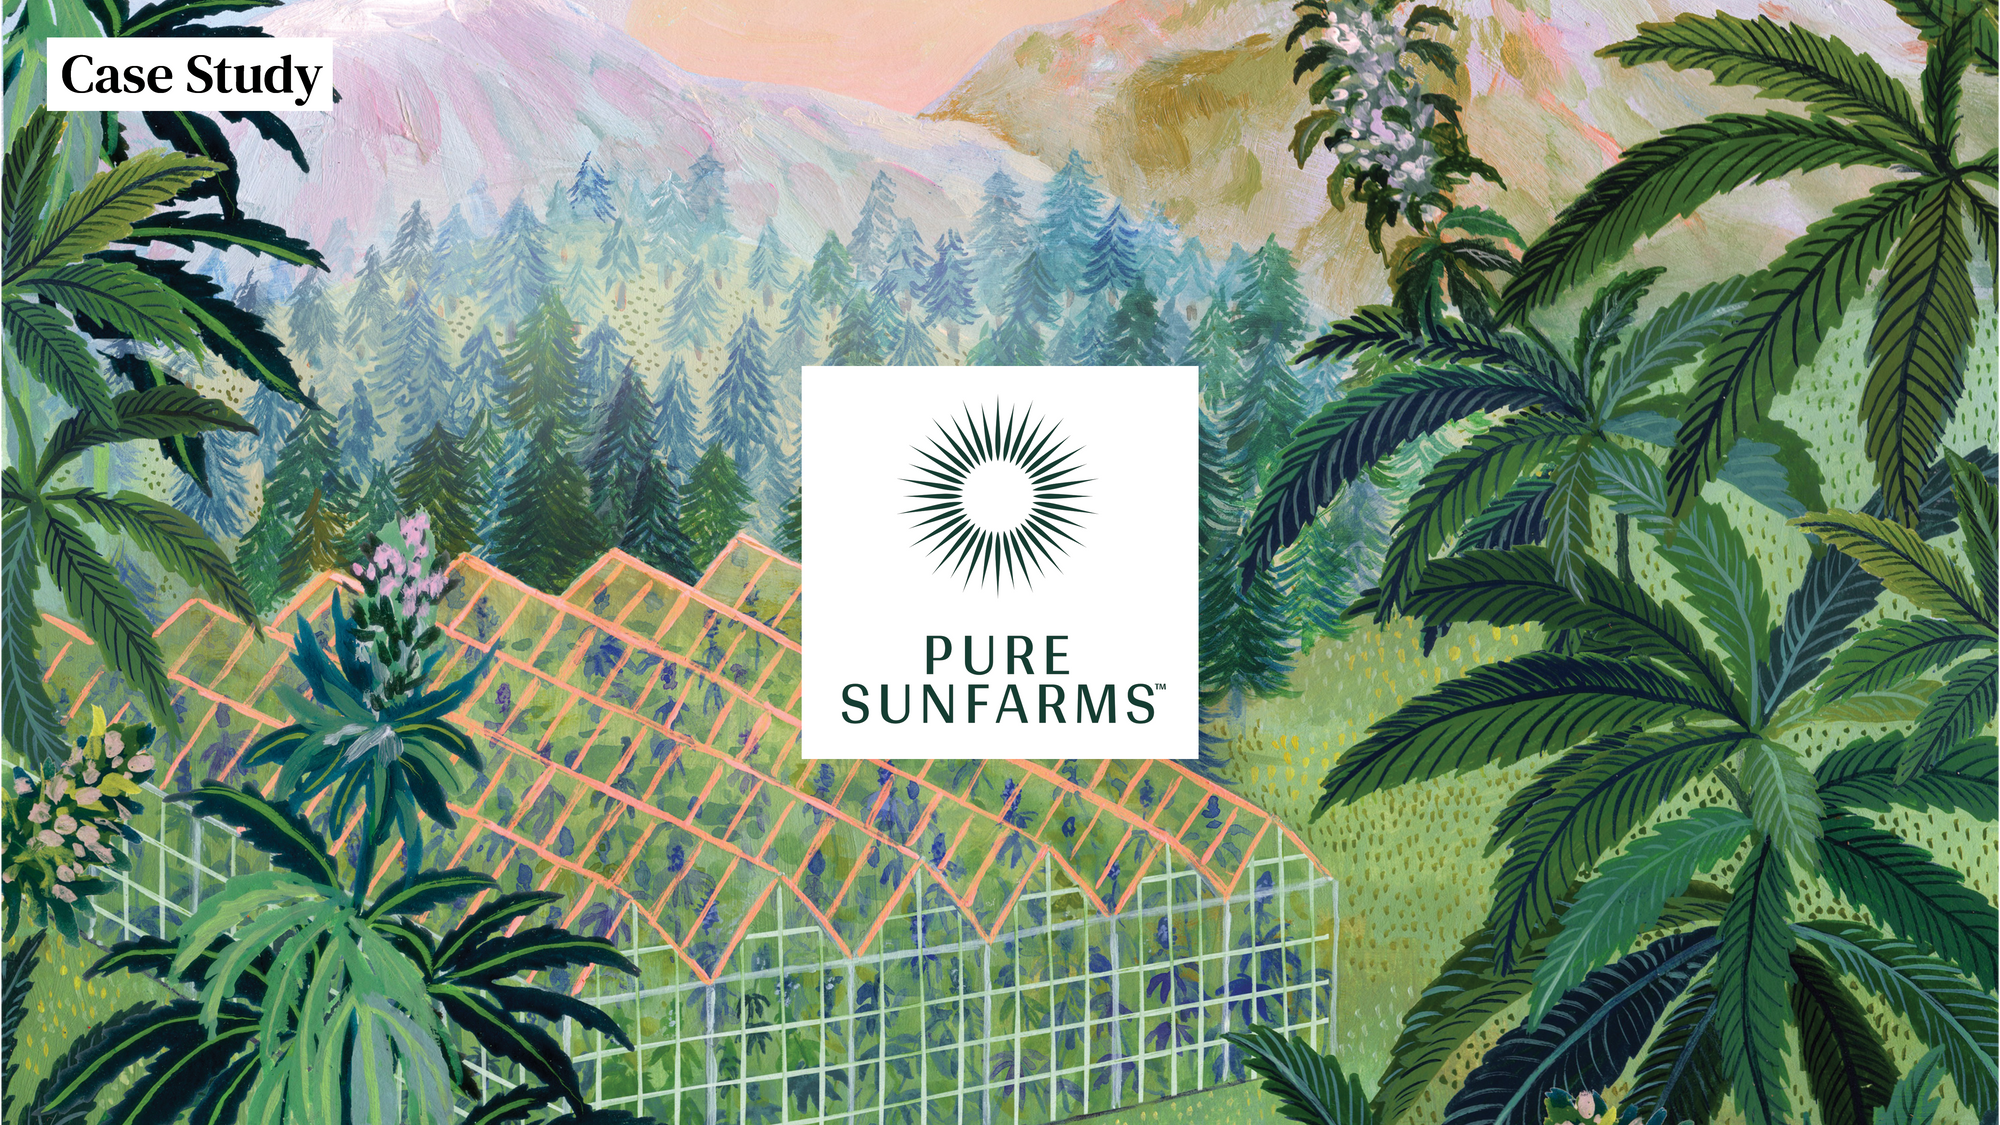 Pure Sunfarms uses Elevated Signals software